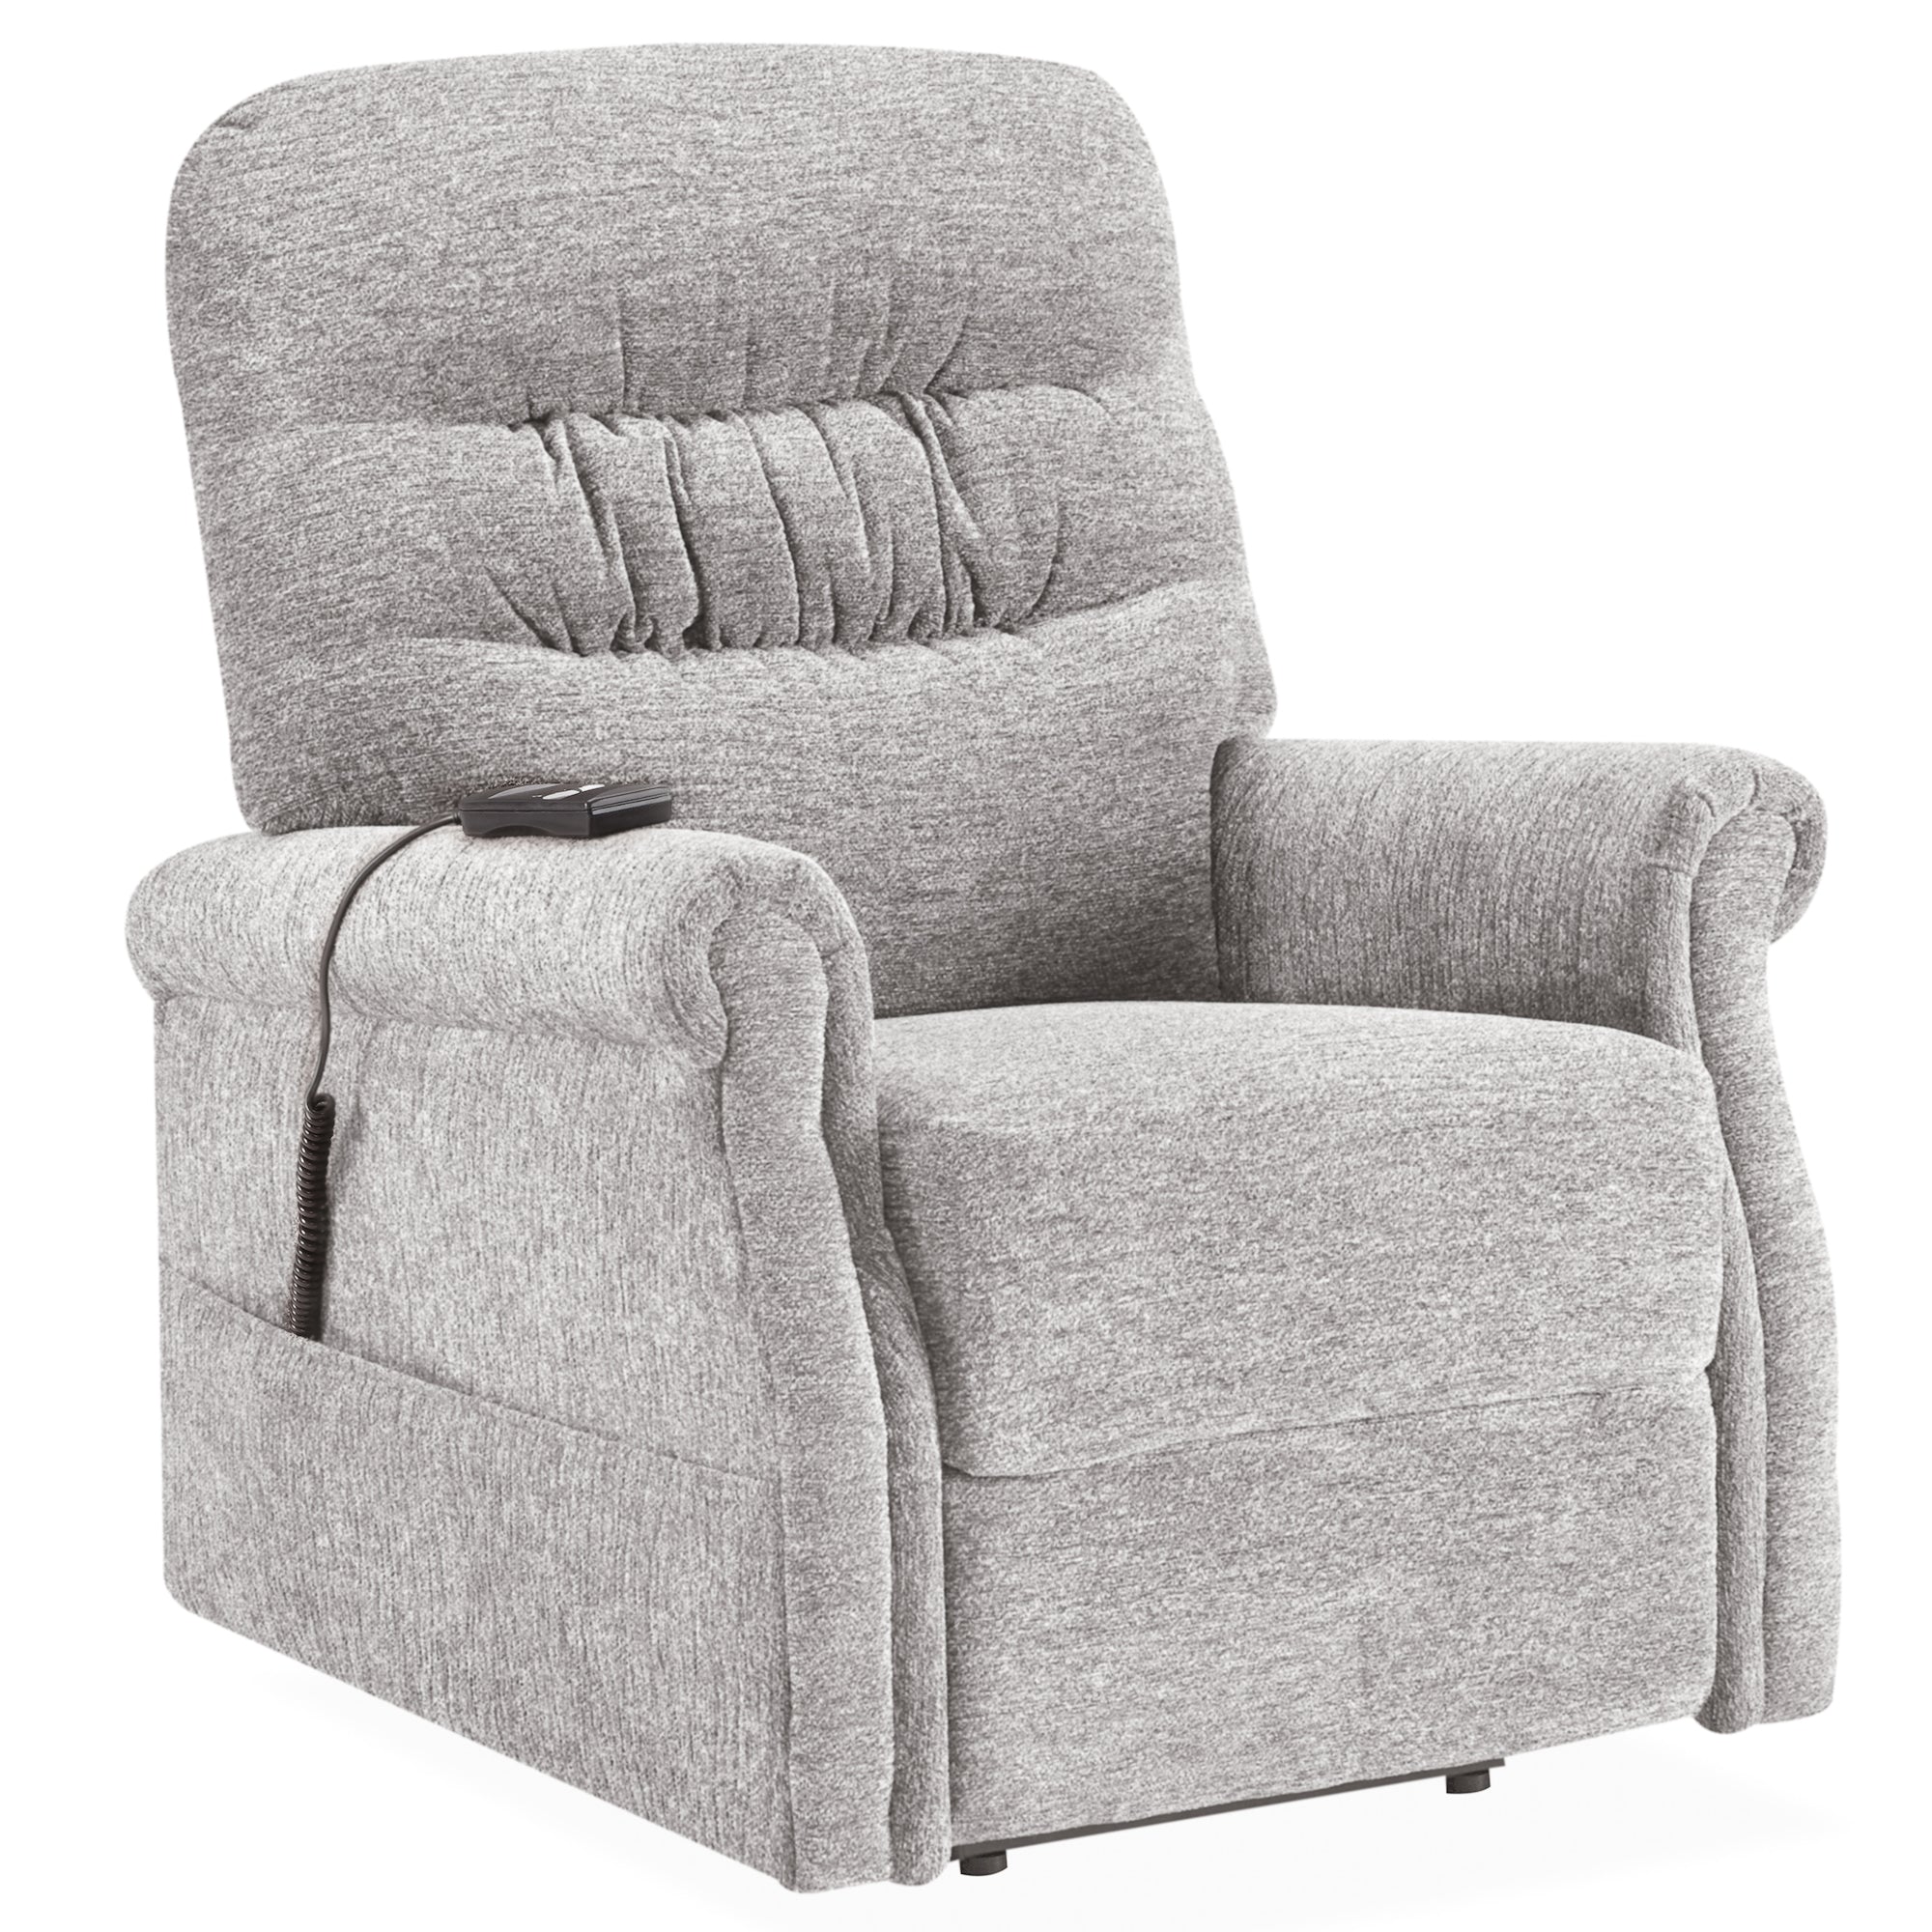 Power Lift Chair Soft Fabric Upholstery Recliner Living Room Sofa Chair with Remote-Boyel Living